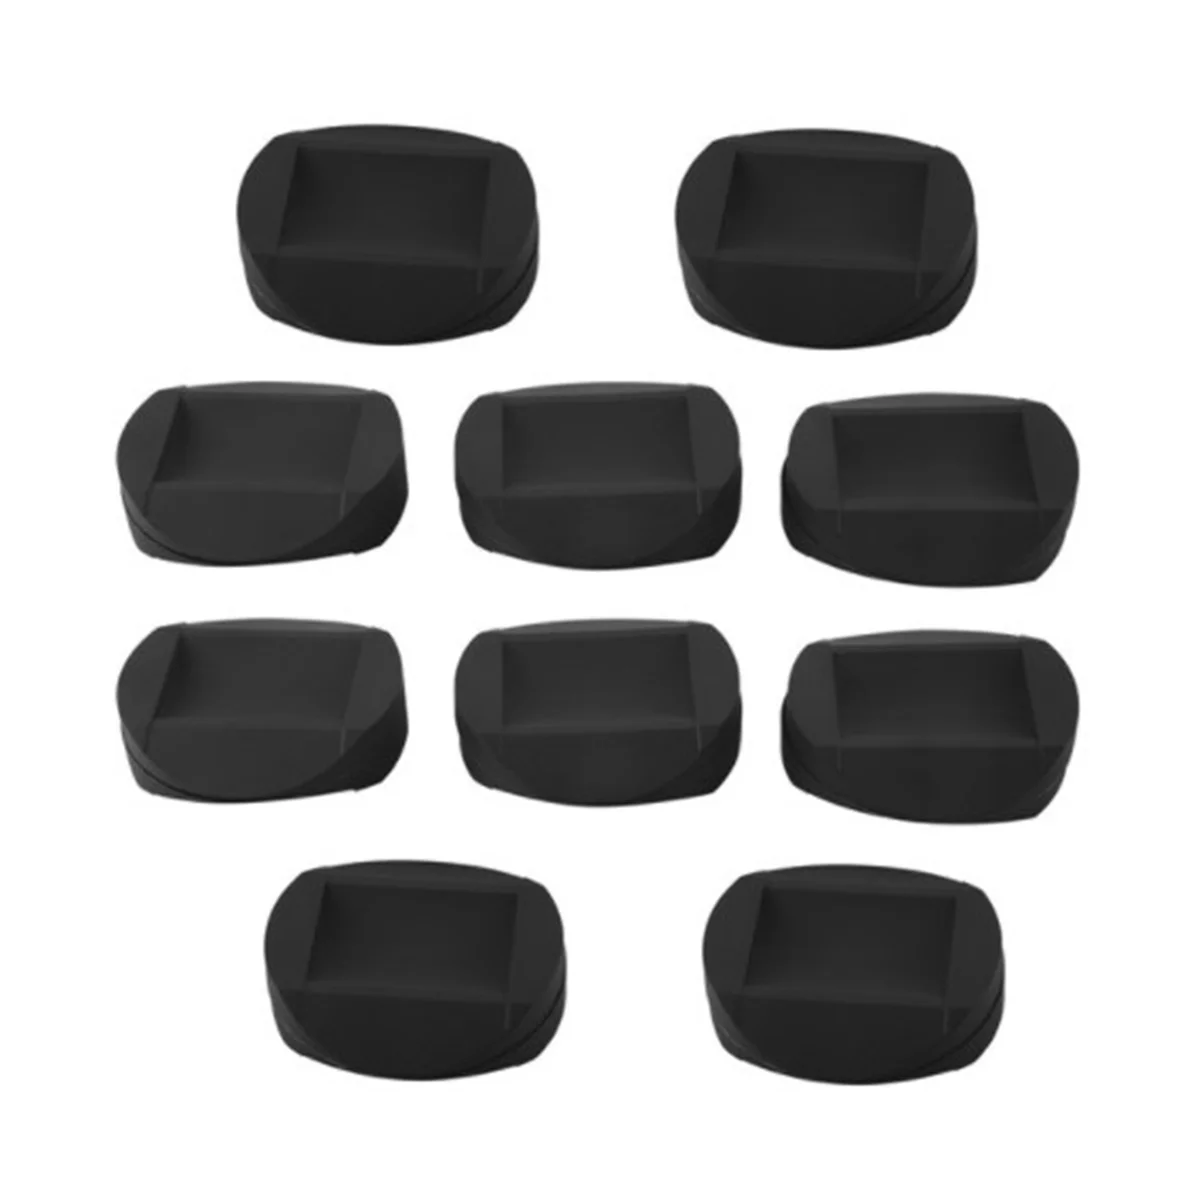 

10Pcs Furniture Cups-Bed Stopper,Rubber Furniture Coasters Cups for All Floors & Wheels of Furniture,Sofas,Beds,Chairs